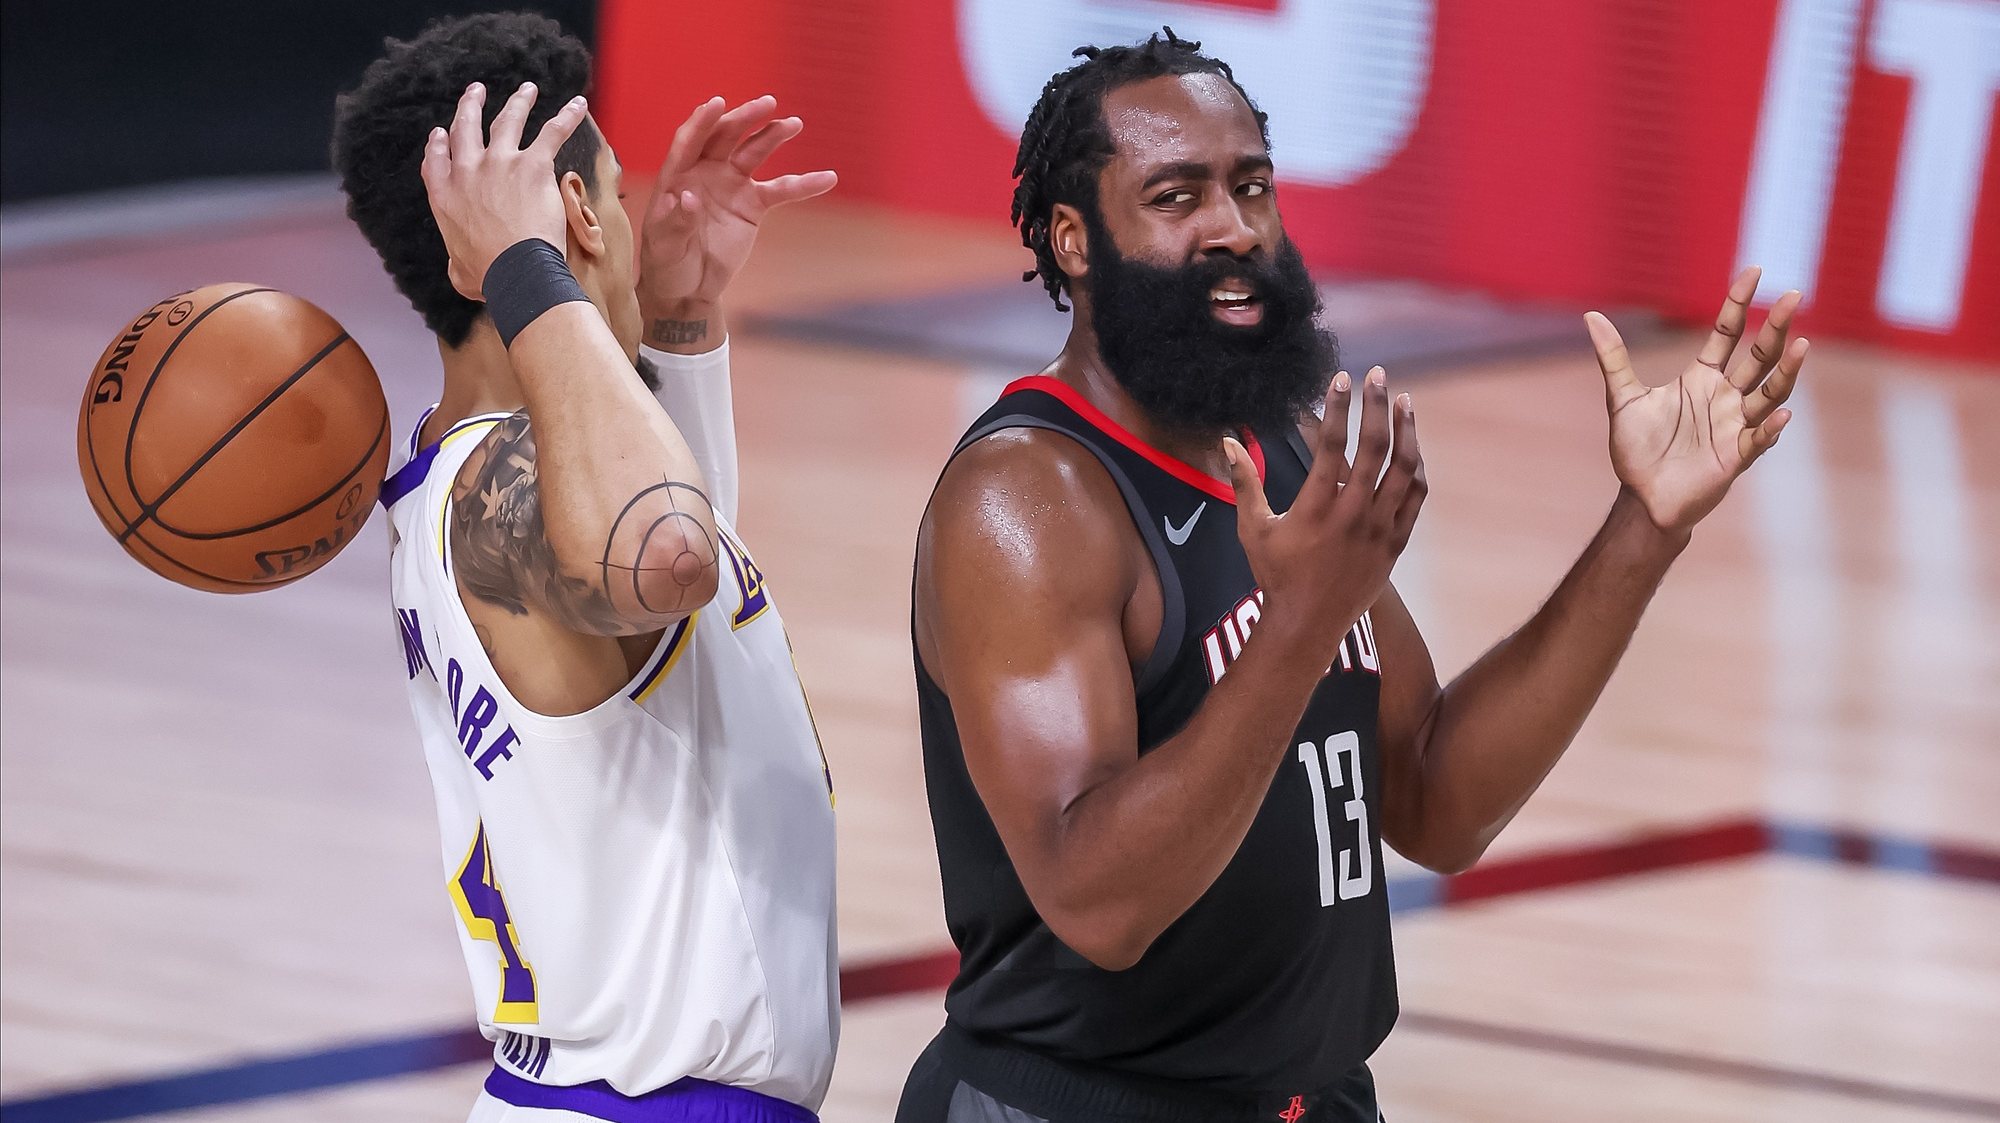 epa08665556 Houston Rockets guard James Harden (R) reacts to having an offensive foul called against him as Los Angeles Lakers guard Danny Green (L) looks on during the second half of the NBA basketball semifinal Western Conference playoff game five between the Houston Rockets and the Los Angeles Lakers at the ESPN Wide World of Sports Complex in Kissimmee, Florida, USA, 12 September 2020.  EPA/ERIK S. LESSER  SHUTTERSTOCK OUT